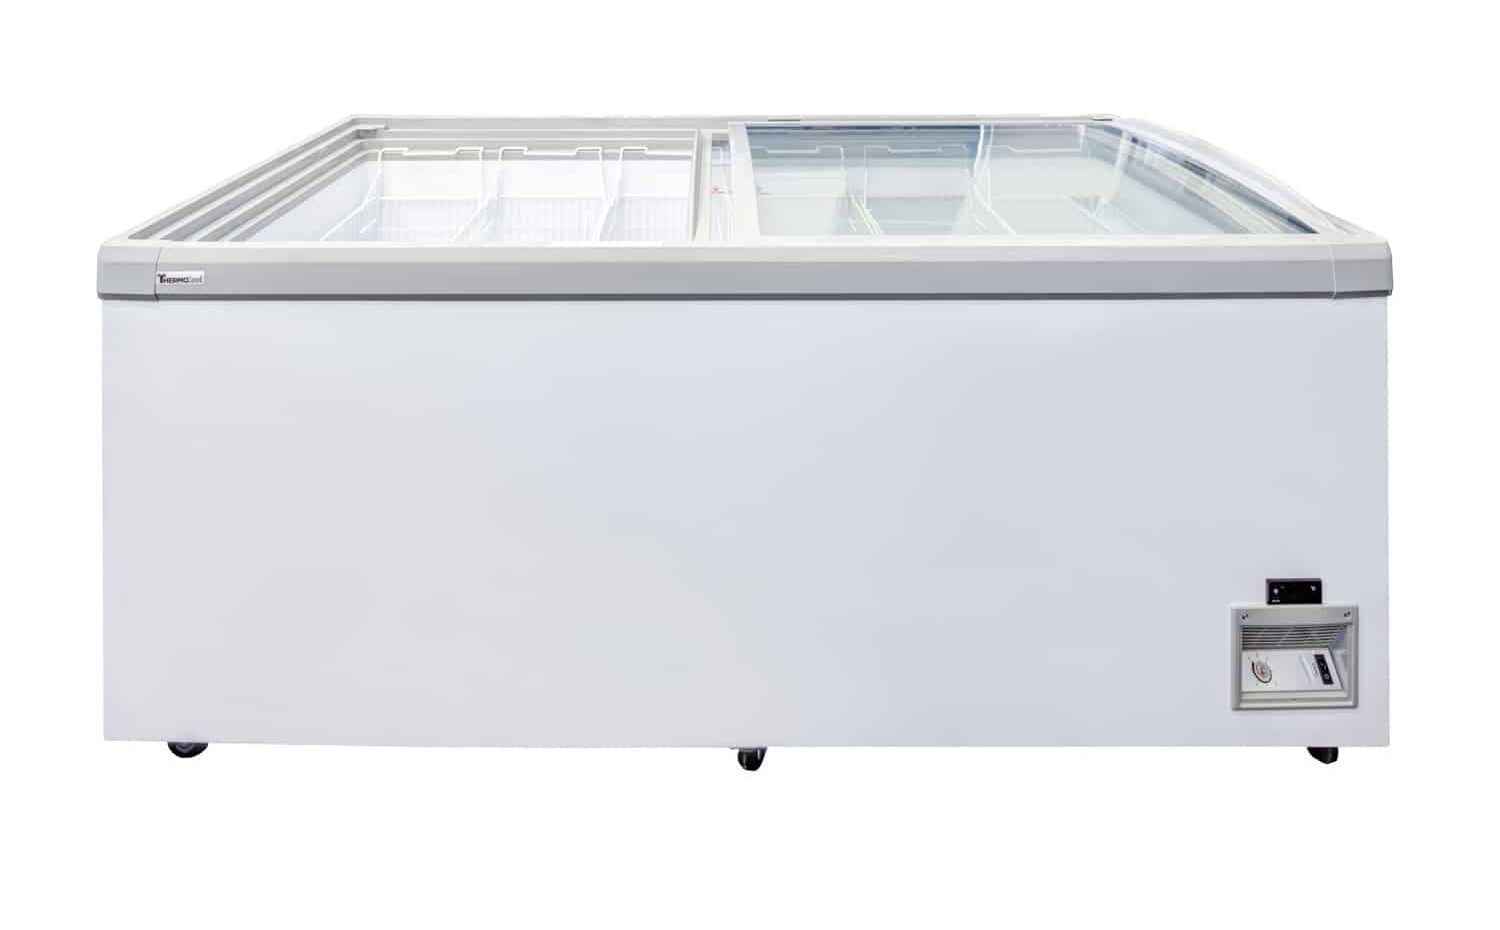 Do businesses still use Commercial Chest Freezers?